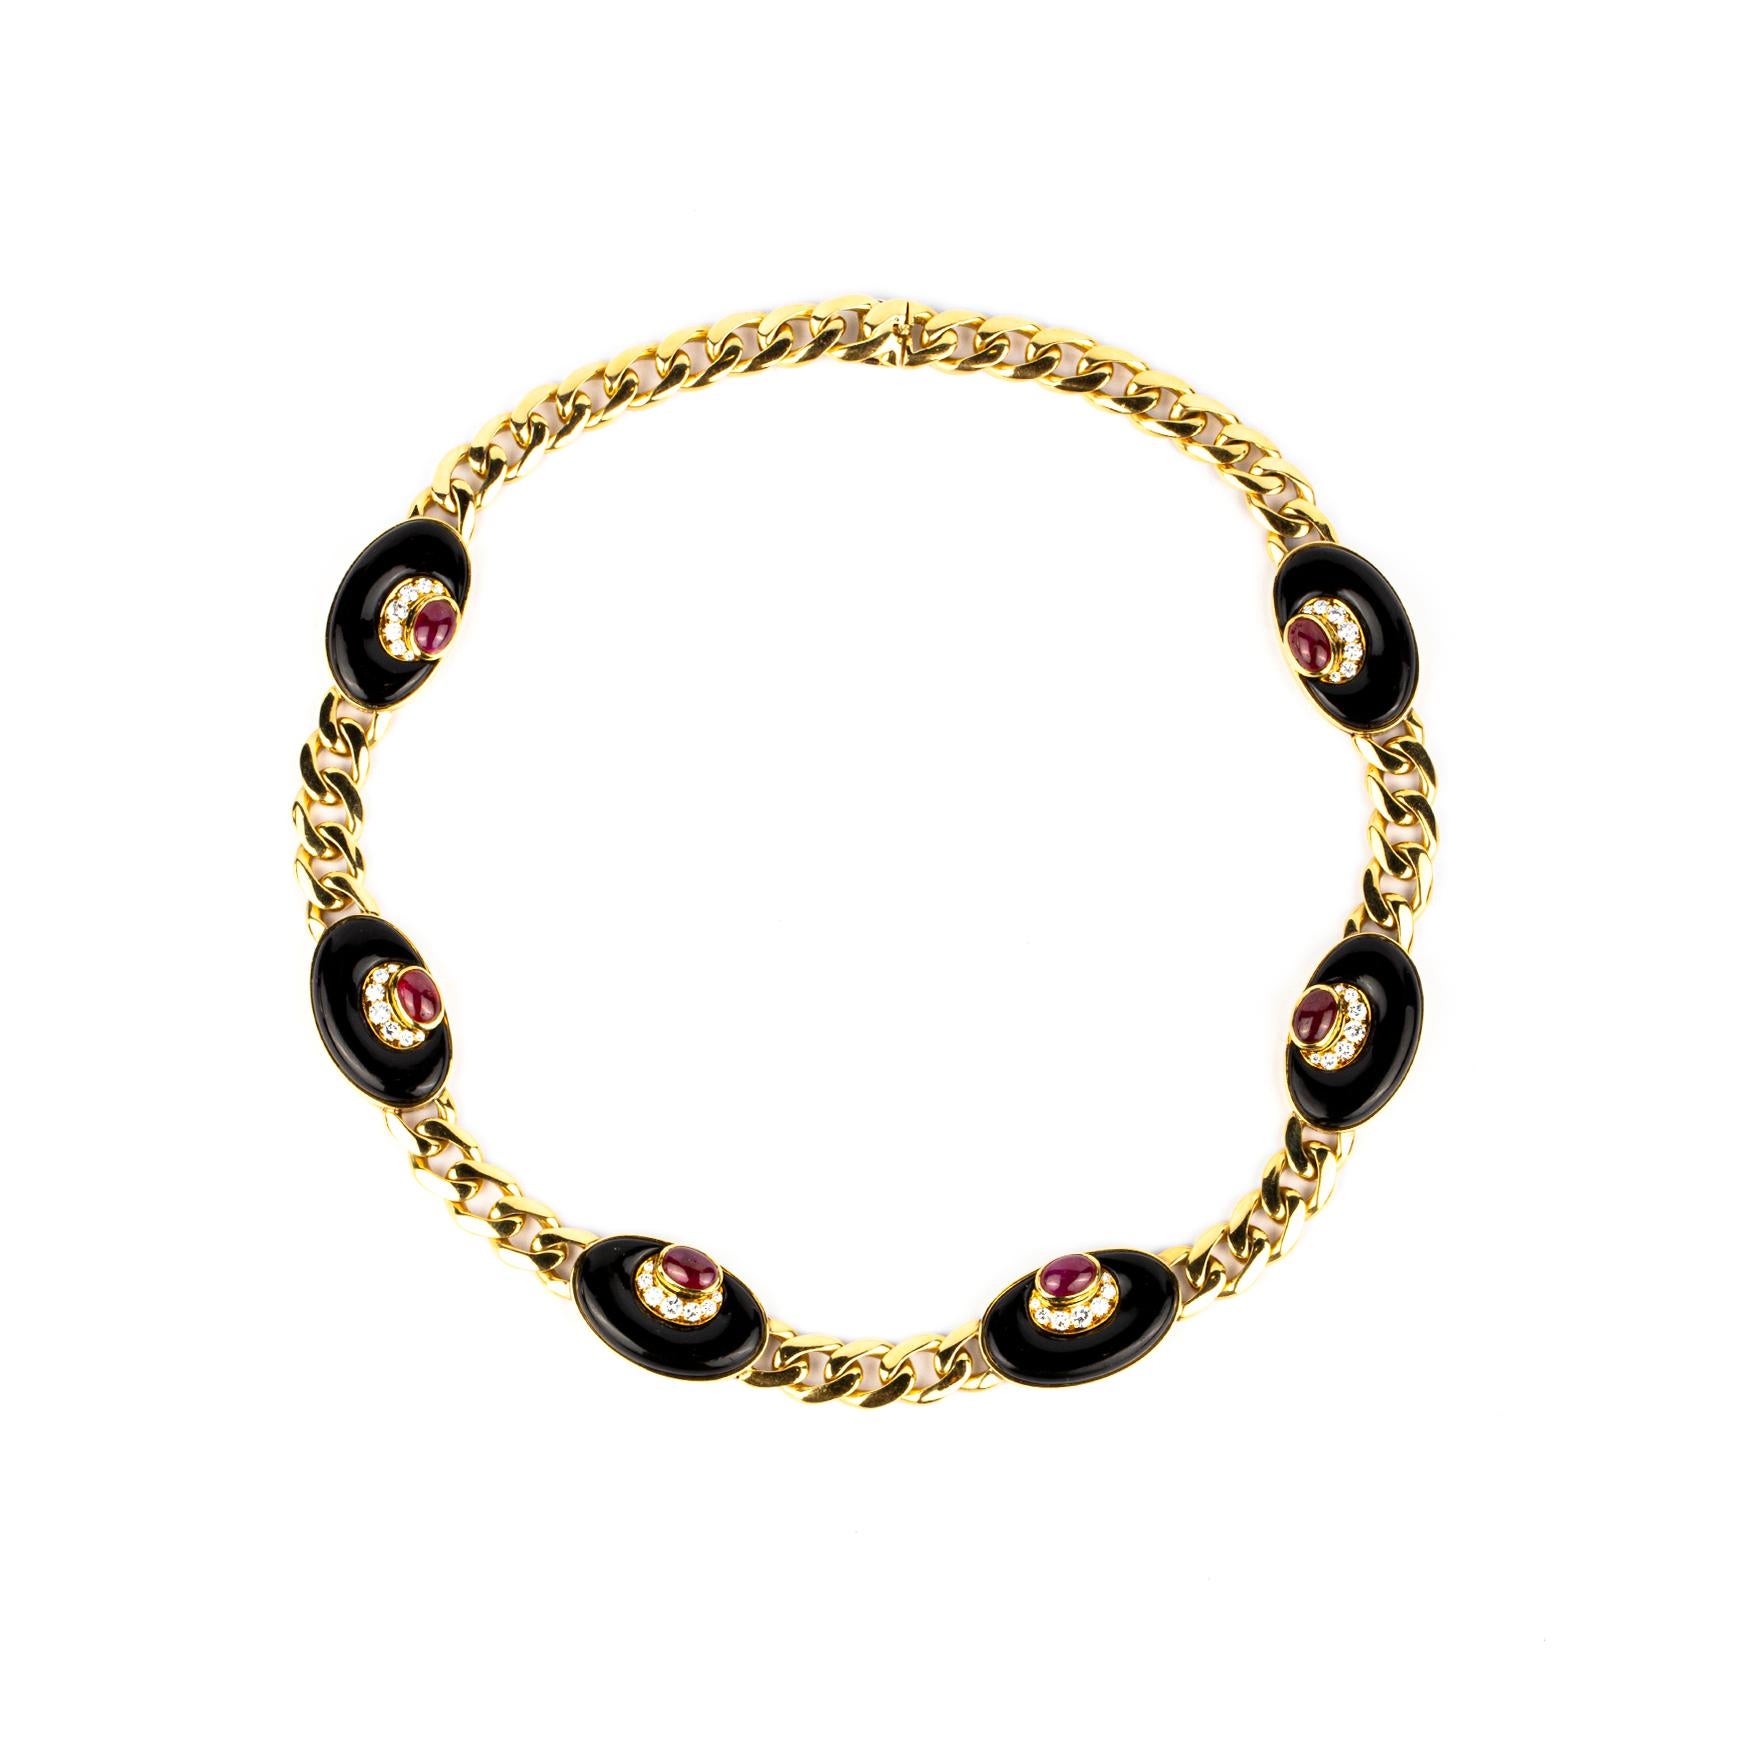 Rare Bulgari Onyx, Ruby and Gold “Half Moon” Set comprising Necklace and Earrings. Made in Italy, circa 1970.